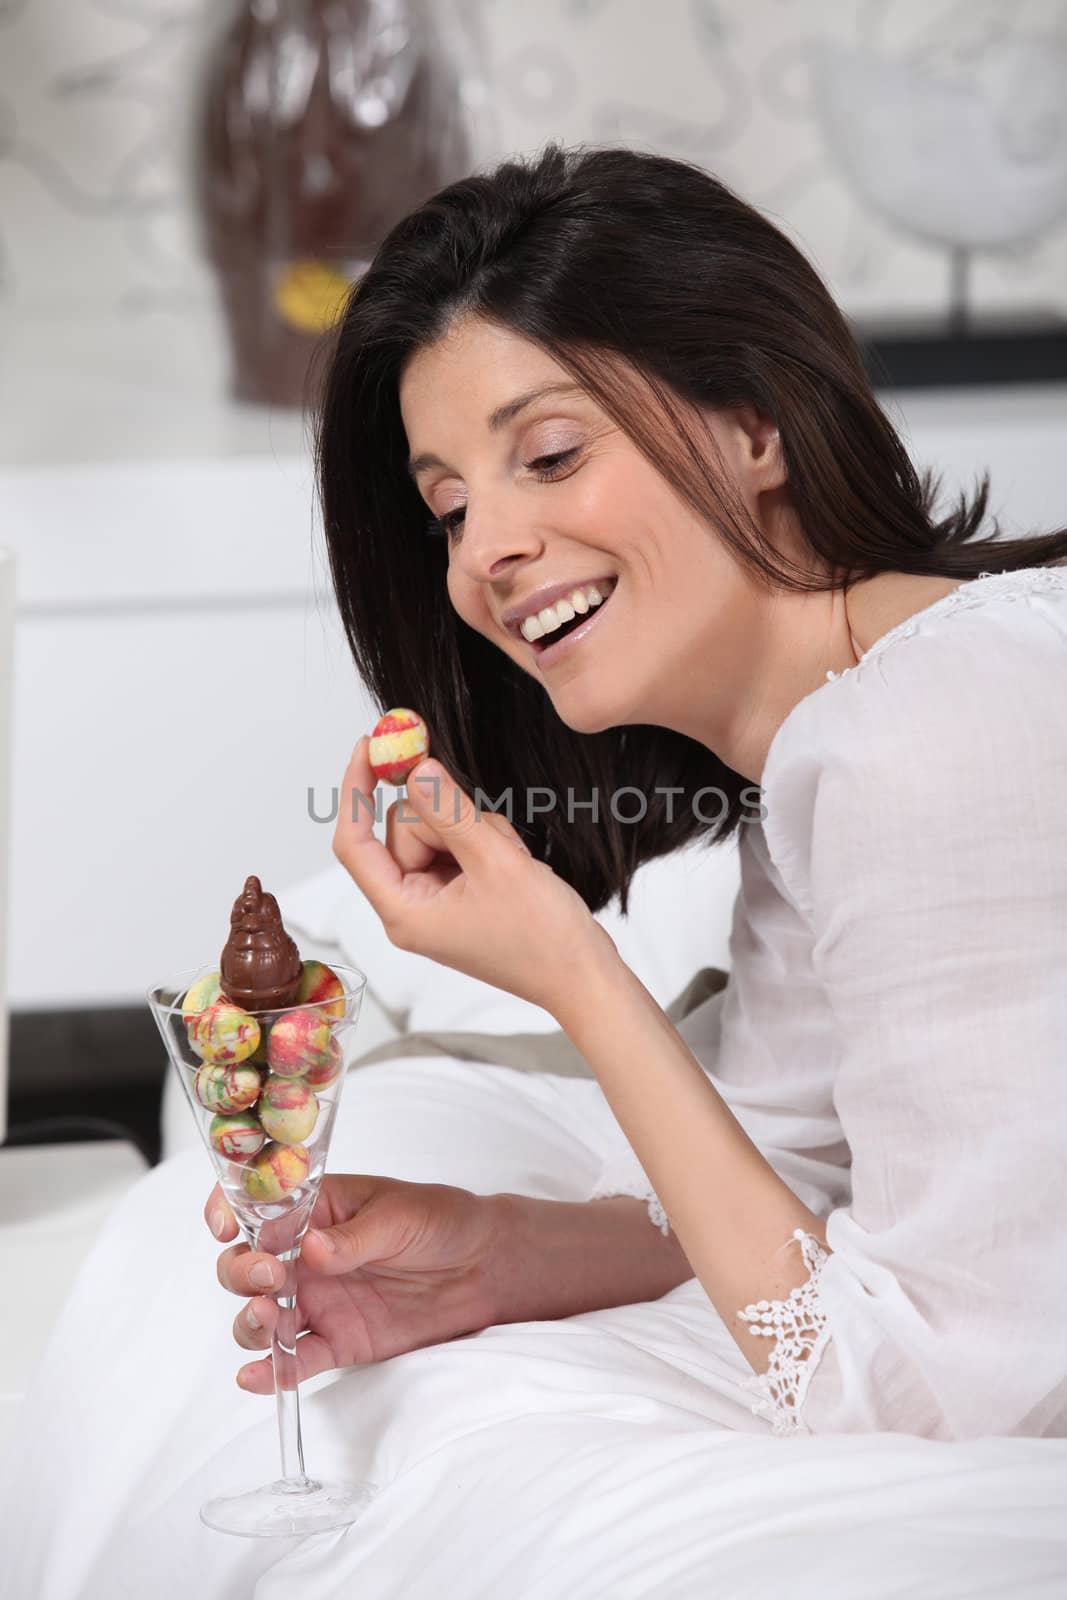 Cheerful woman eating Easter eggs by phovoir